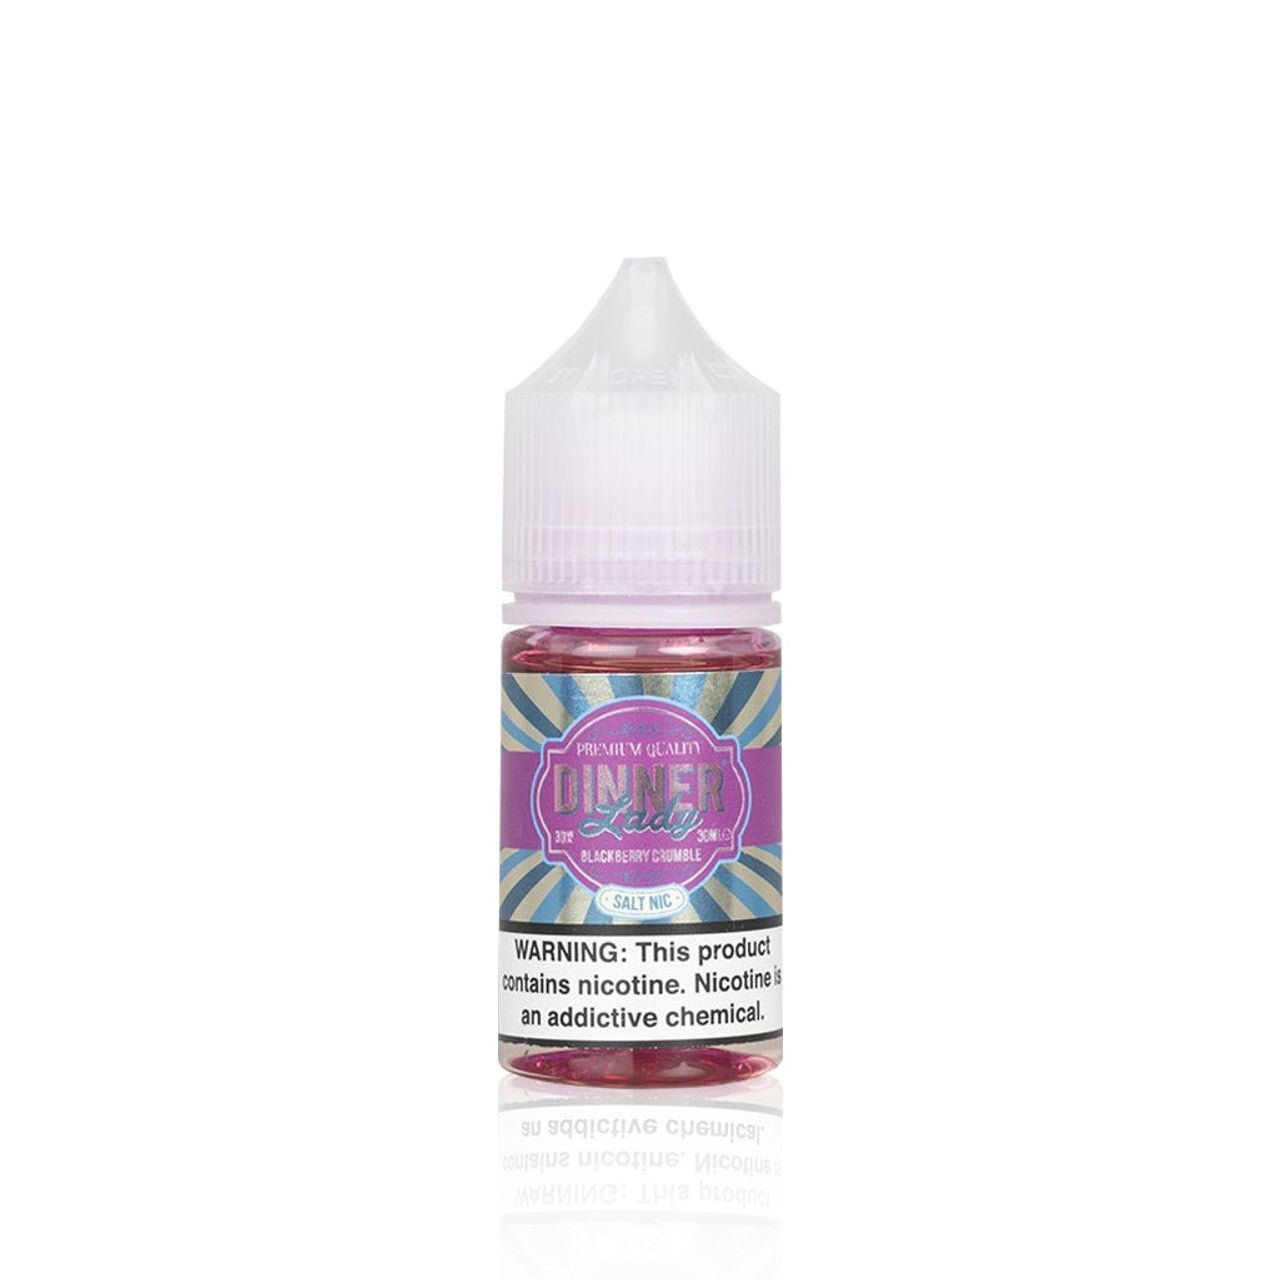 DINNER LADY - BLACKBERRY CRUMBLE - 30ML - EJUICEOVERSTOCK.COM